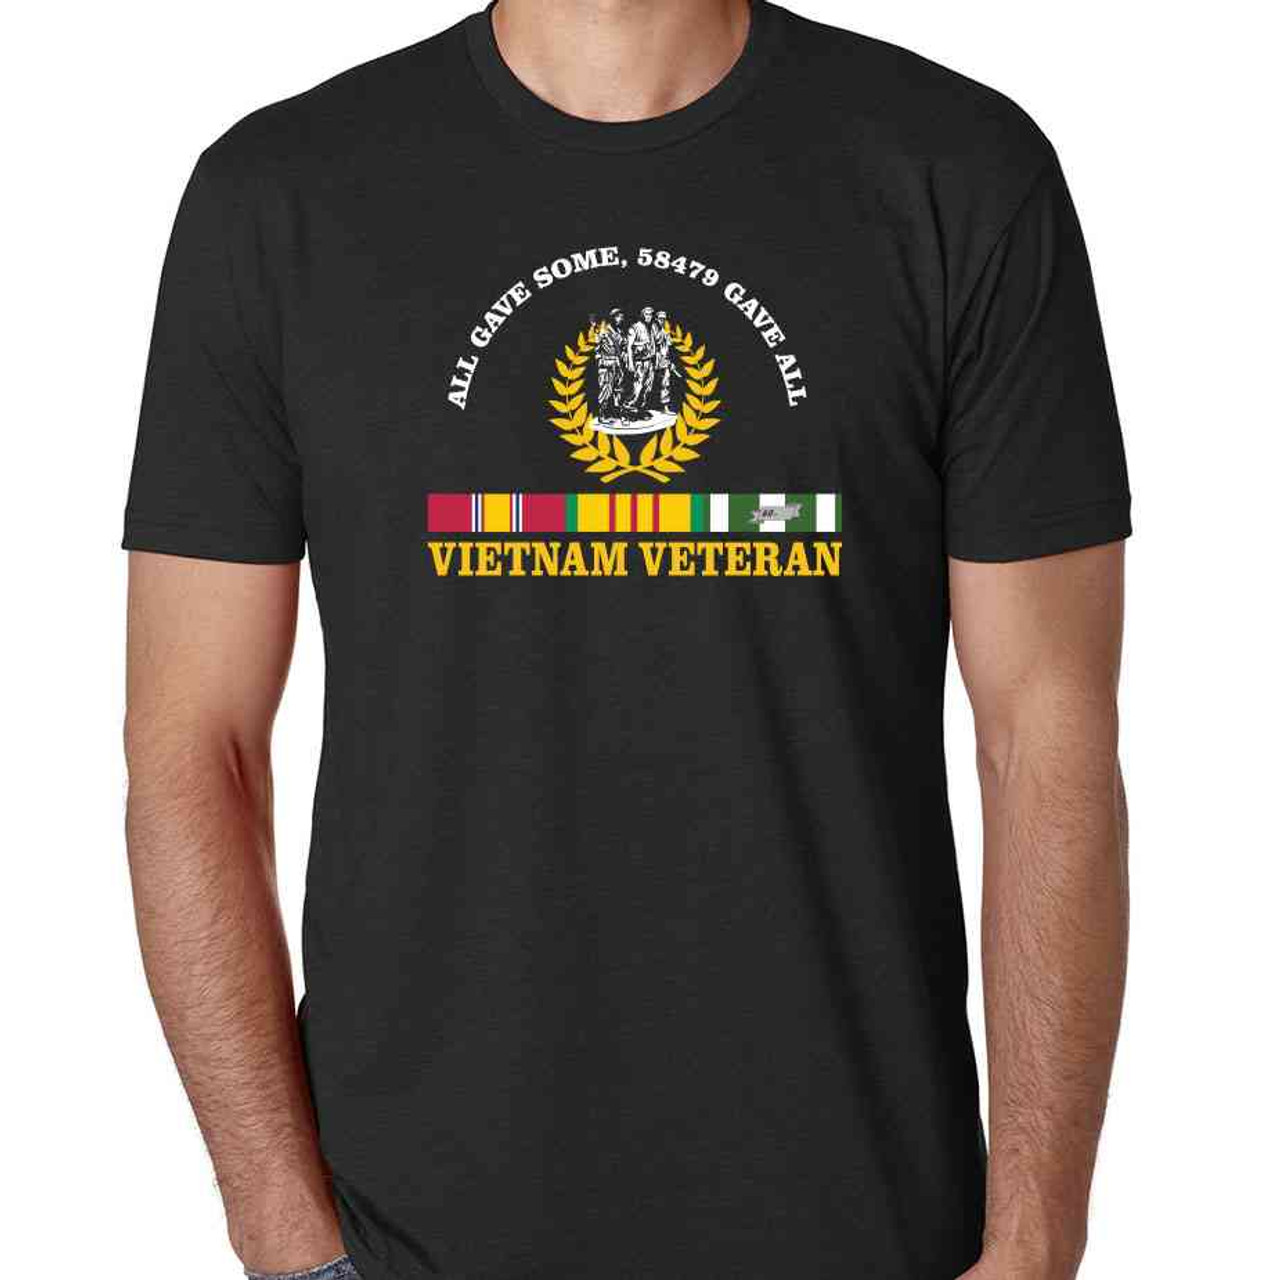 vietnam veteran all gave some 58479 gave all special edition tshirt